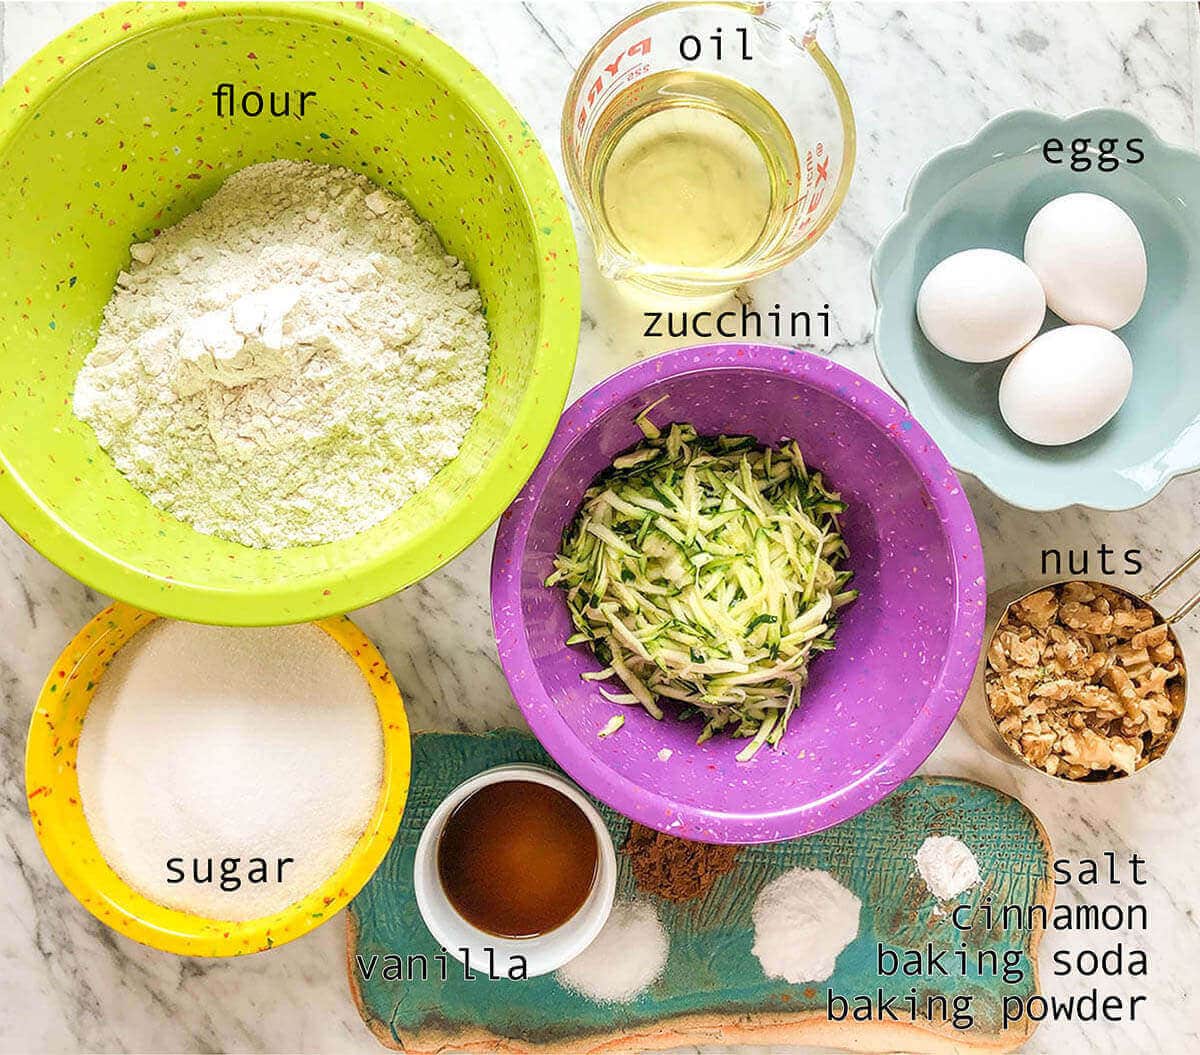 Ingredients for easy zucchini bread recipe.